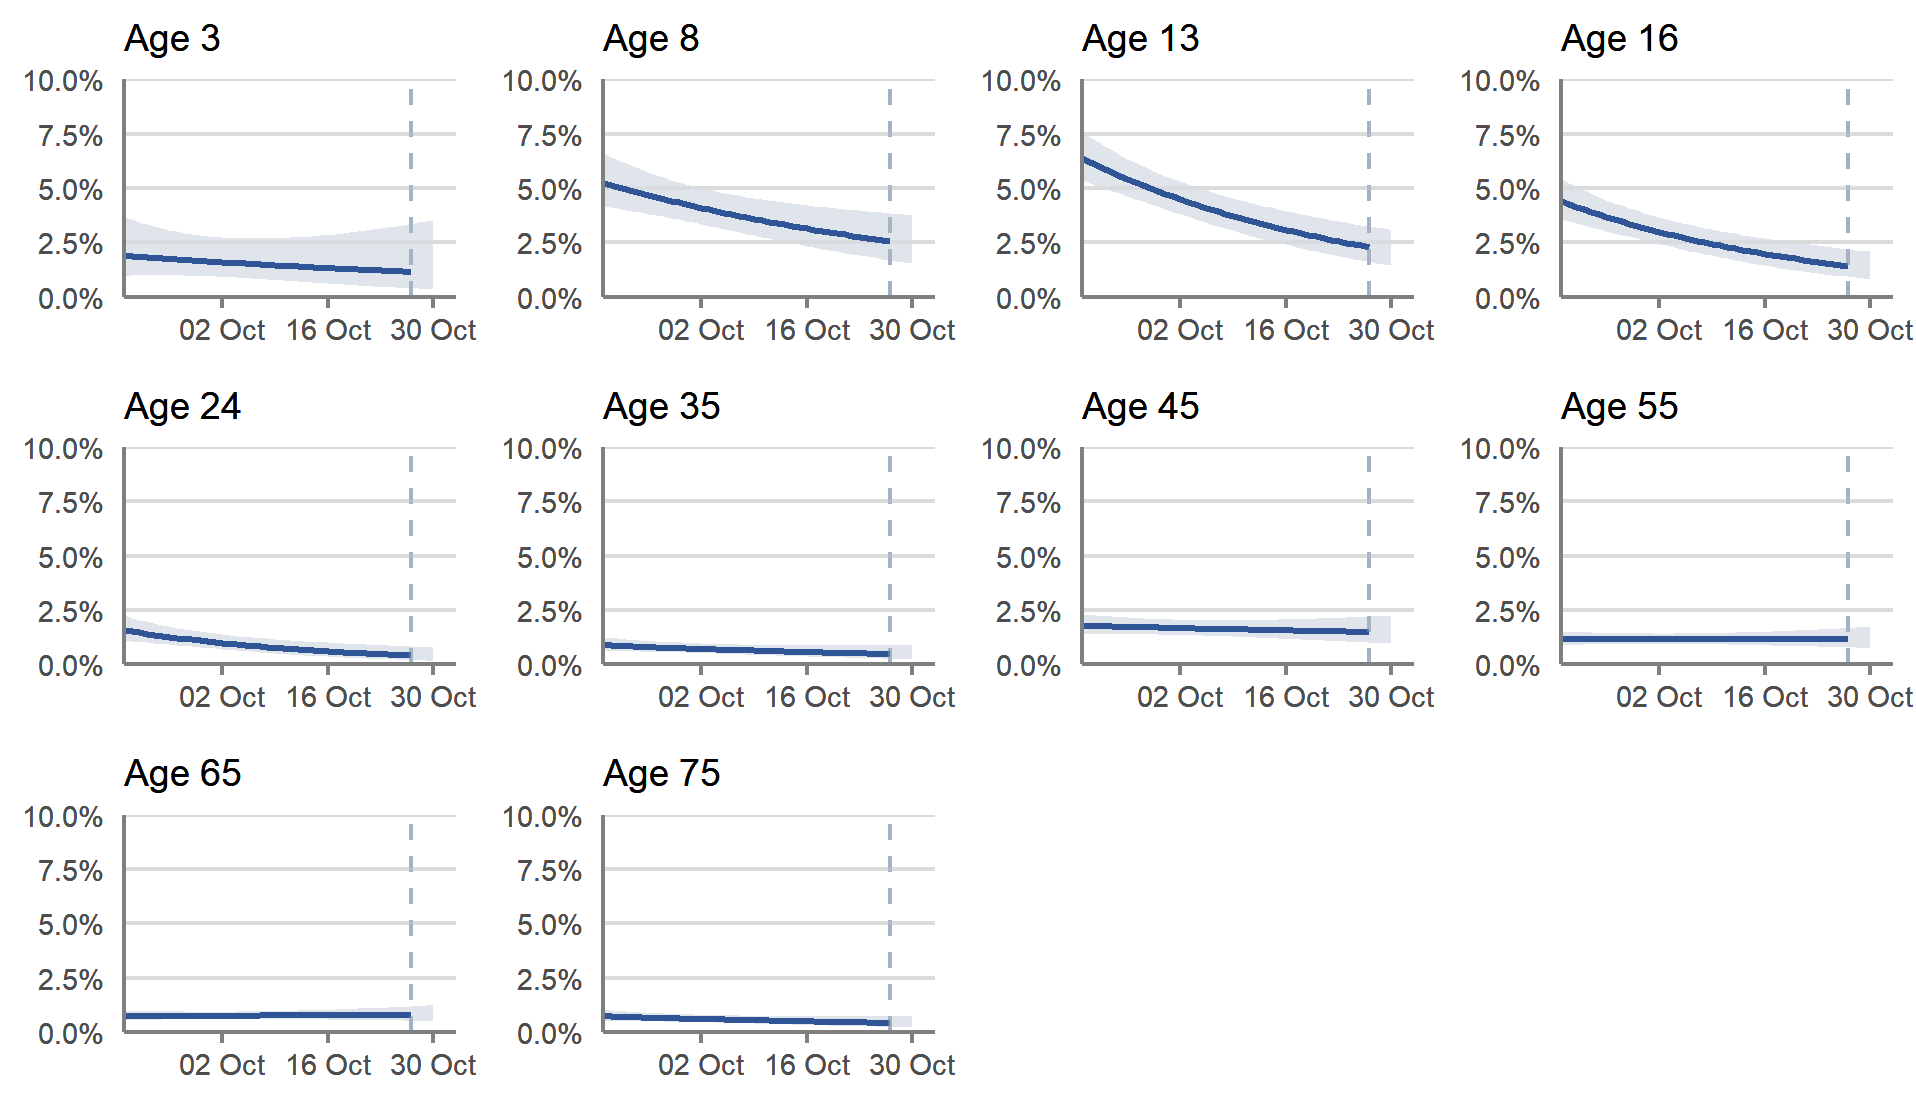 Figure 3: Modelled daily estimates of the percentage of the private residential population in Scotland testing positive for COVID-19, by reference age, between 19 September and 30 October 2021, including 95% confidence intervals (see notes 2,5,6,8)   This chart shows the percentage of people testing positive for COVID-19 by reference age, between 19 September and 30 October 2021. These estimates are based on modelled daily estimates of the percentage of the private residential population testing positive for COVID-19 in Scotland by single year of age.  In Scotland, the proportion of people testing positive remains higher in the younger age groups.  Since the start of October the percentage testing positive decreased for children and young adults, although the trend is uncertain for all age groups in the most recent week.